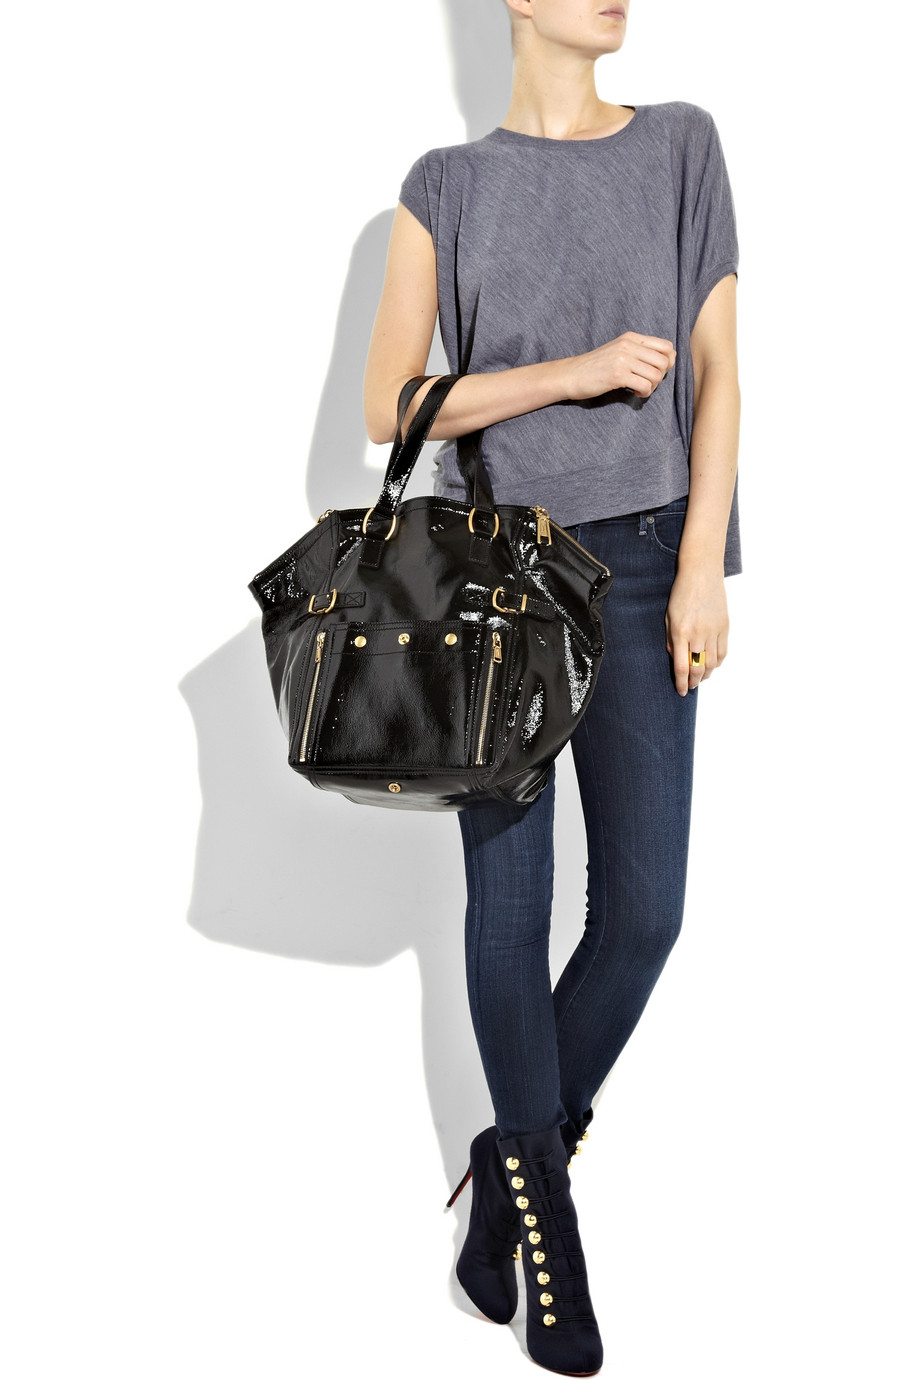 Saint laurent Downtown Patent-leather Tote in Black (nero) | Lyst  